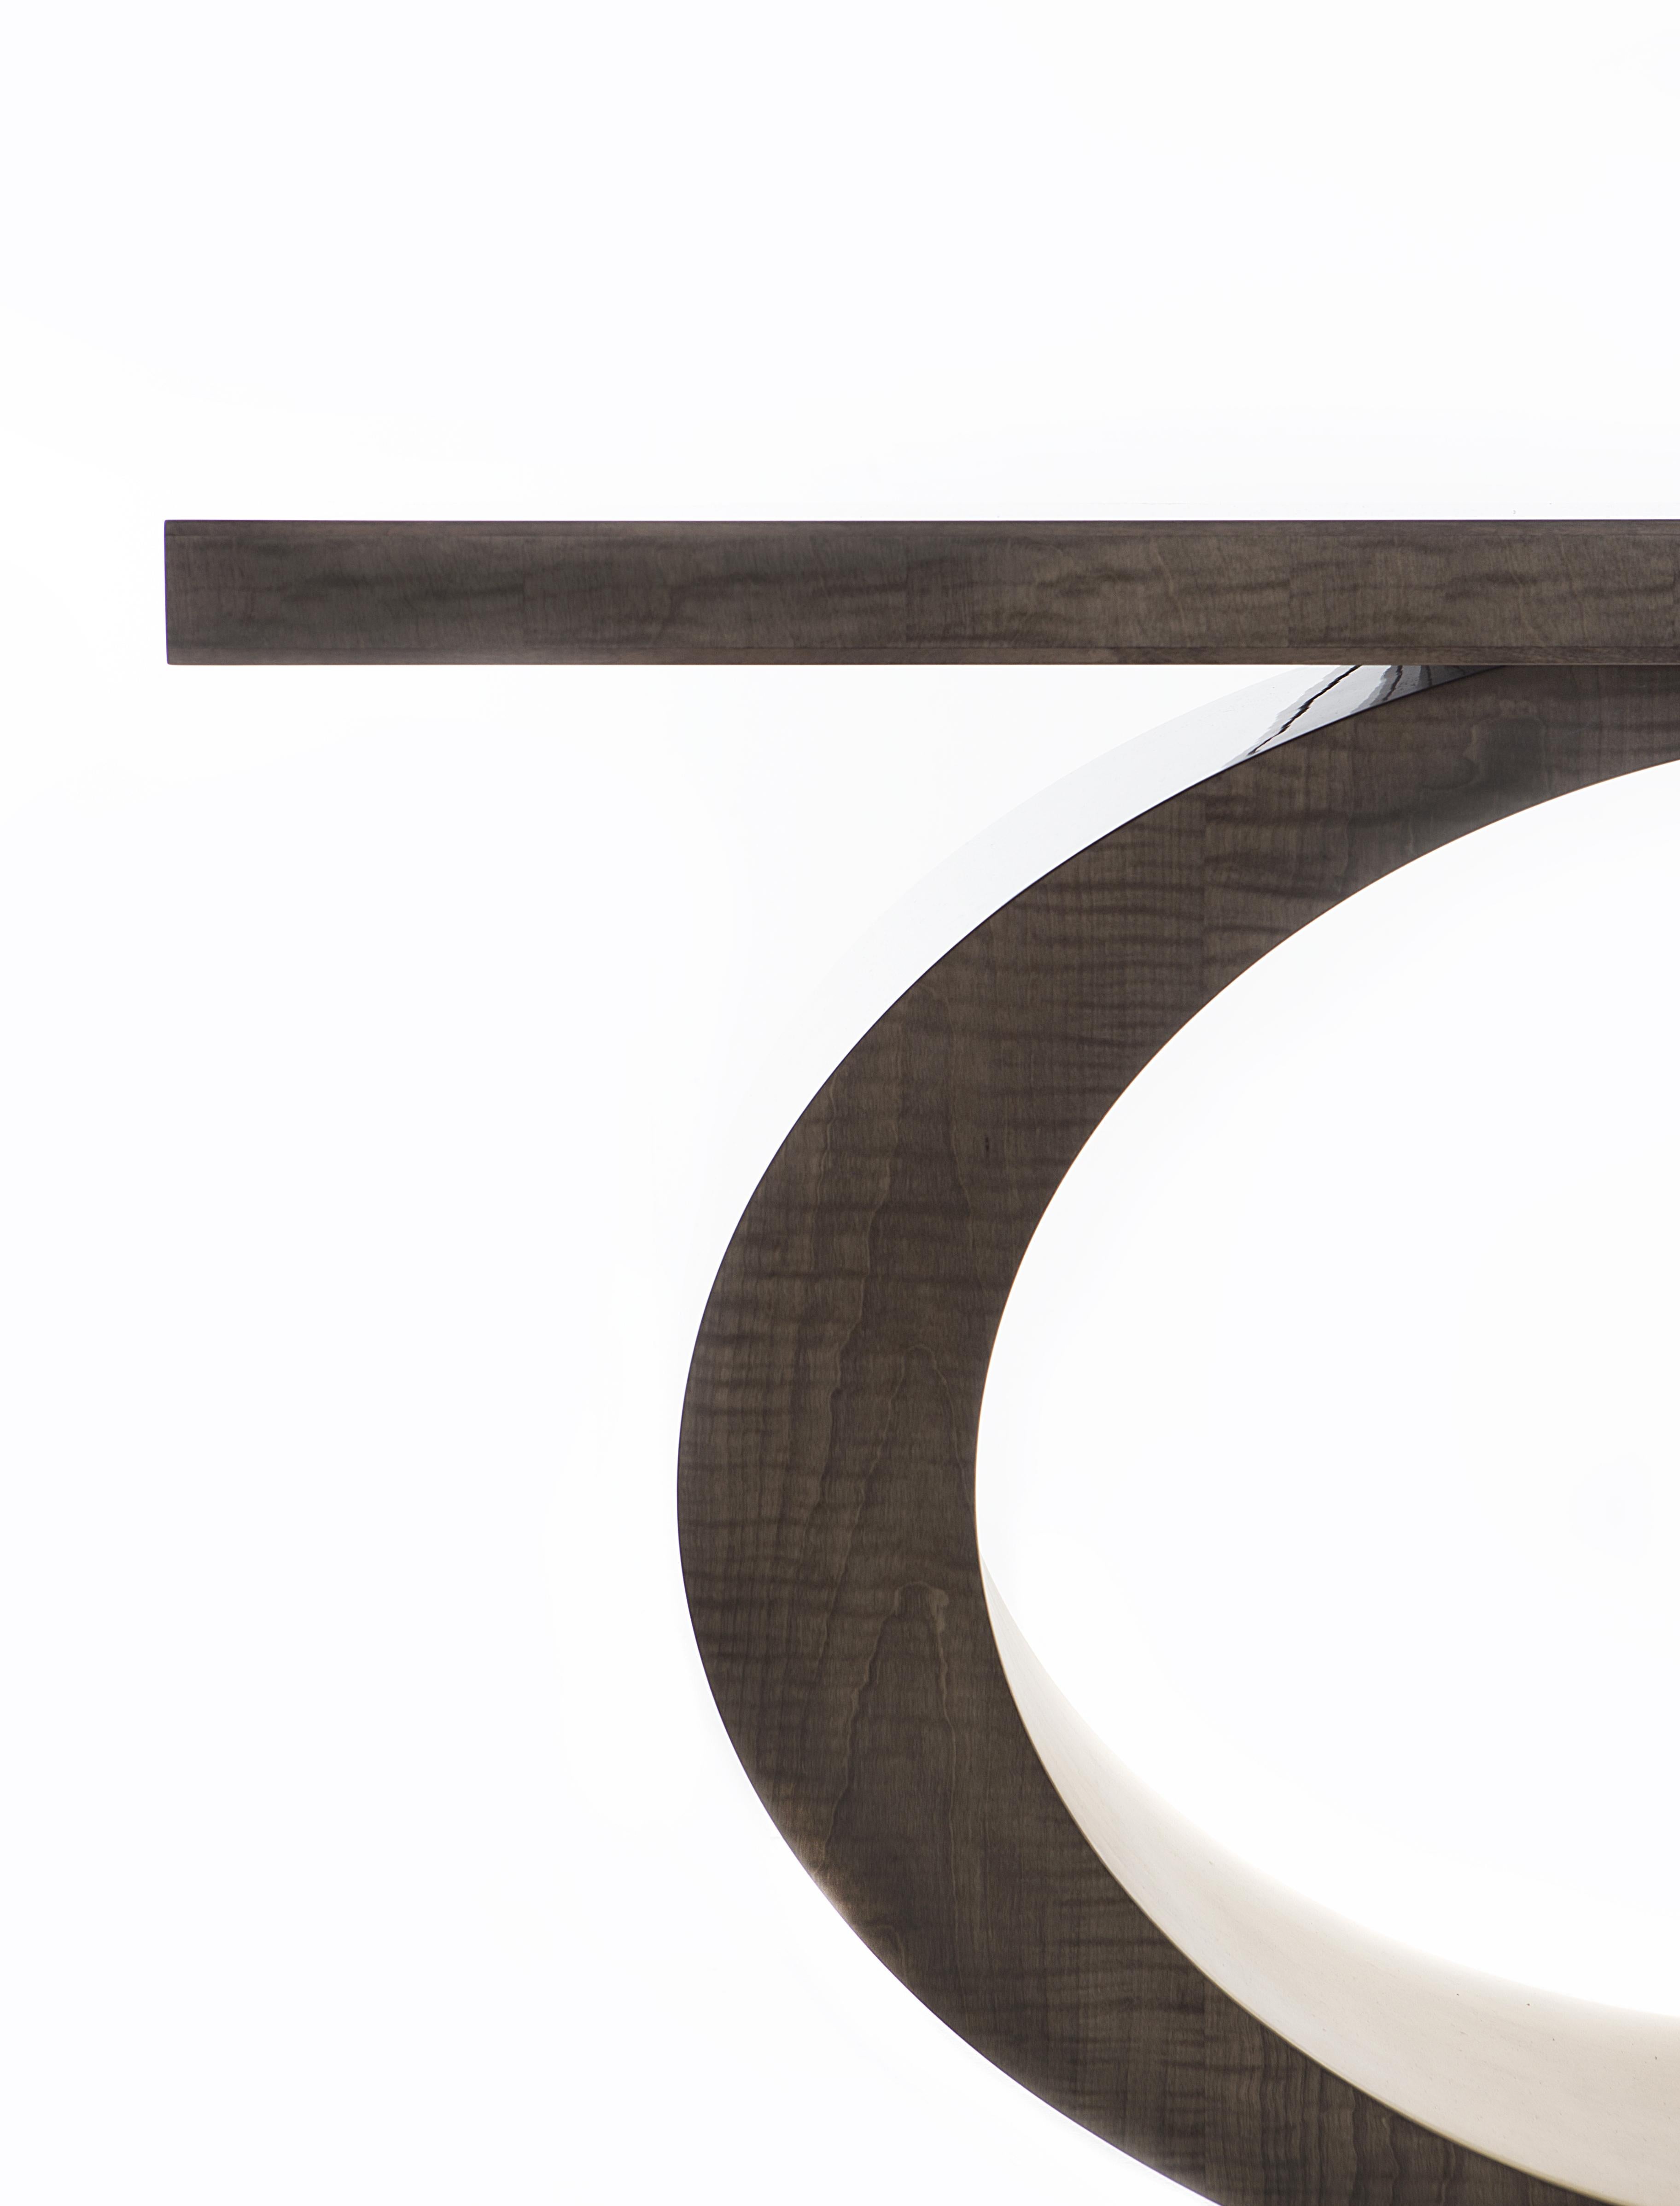 English Davidson's Modern, Mandarin Console Table, in Sycamore Dusk and Moon Gold Leaf